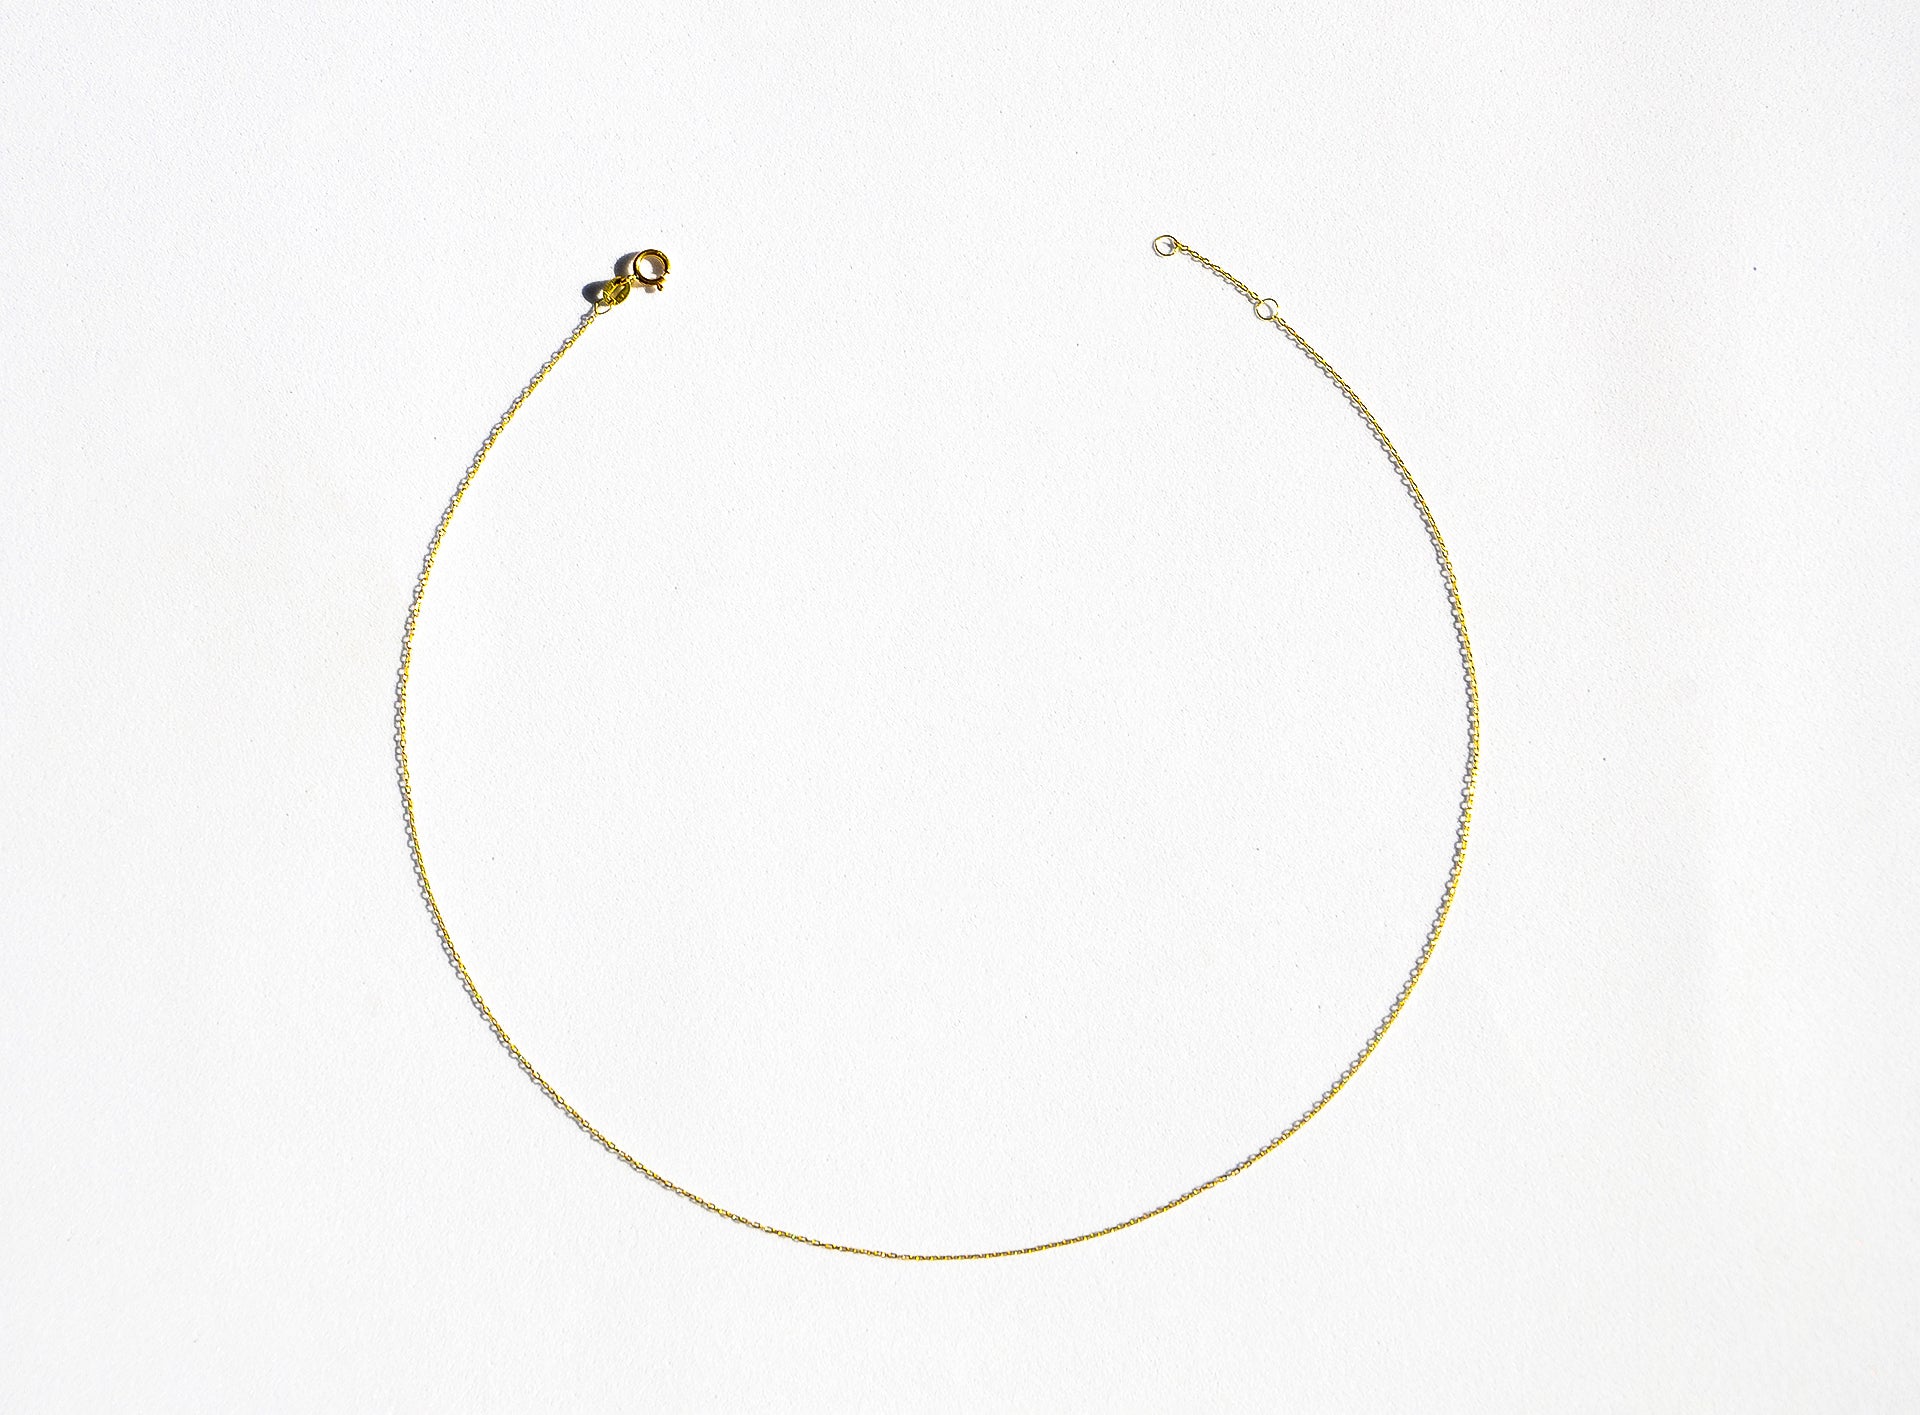 Filigran yellow gold neckless out of 18k solid gold - 40cm length with 2cm extrension.